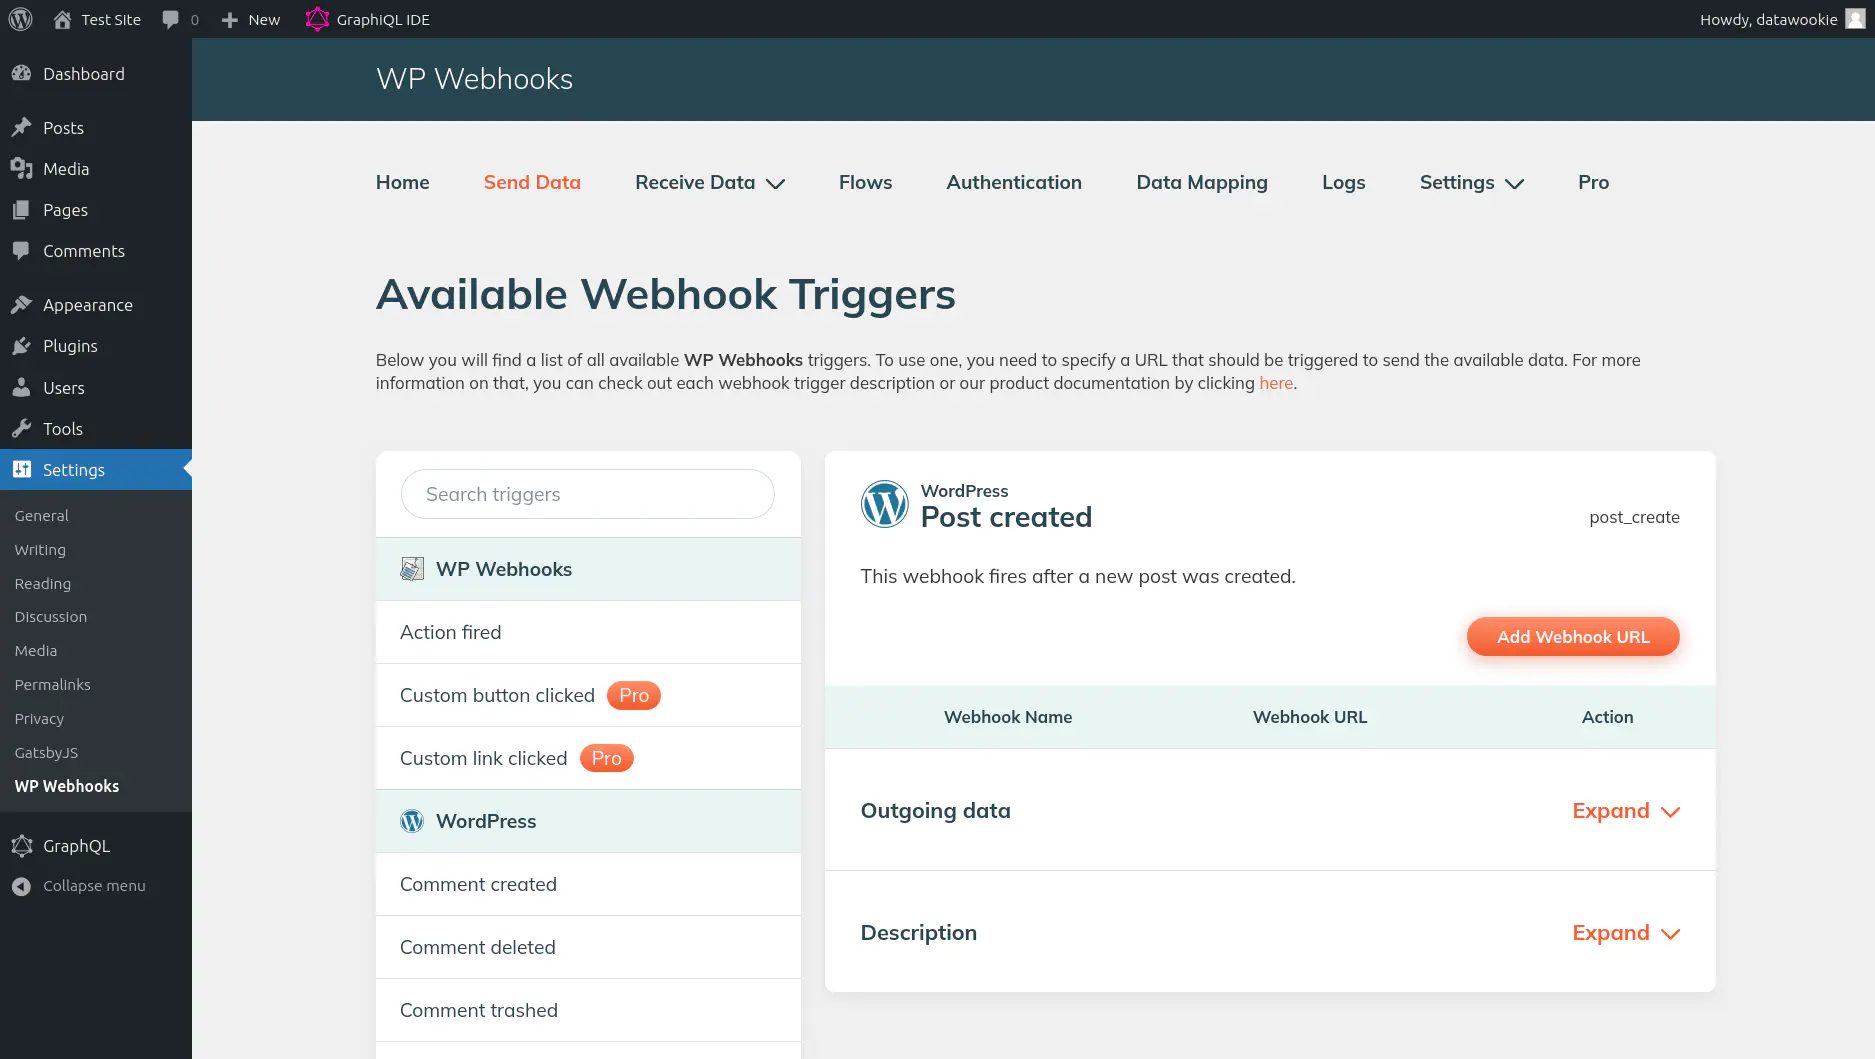 Post created triggers for the WP Webhooks plugin.